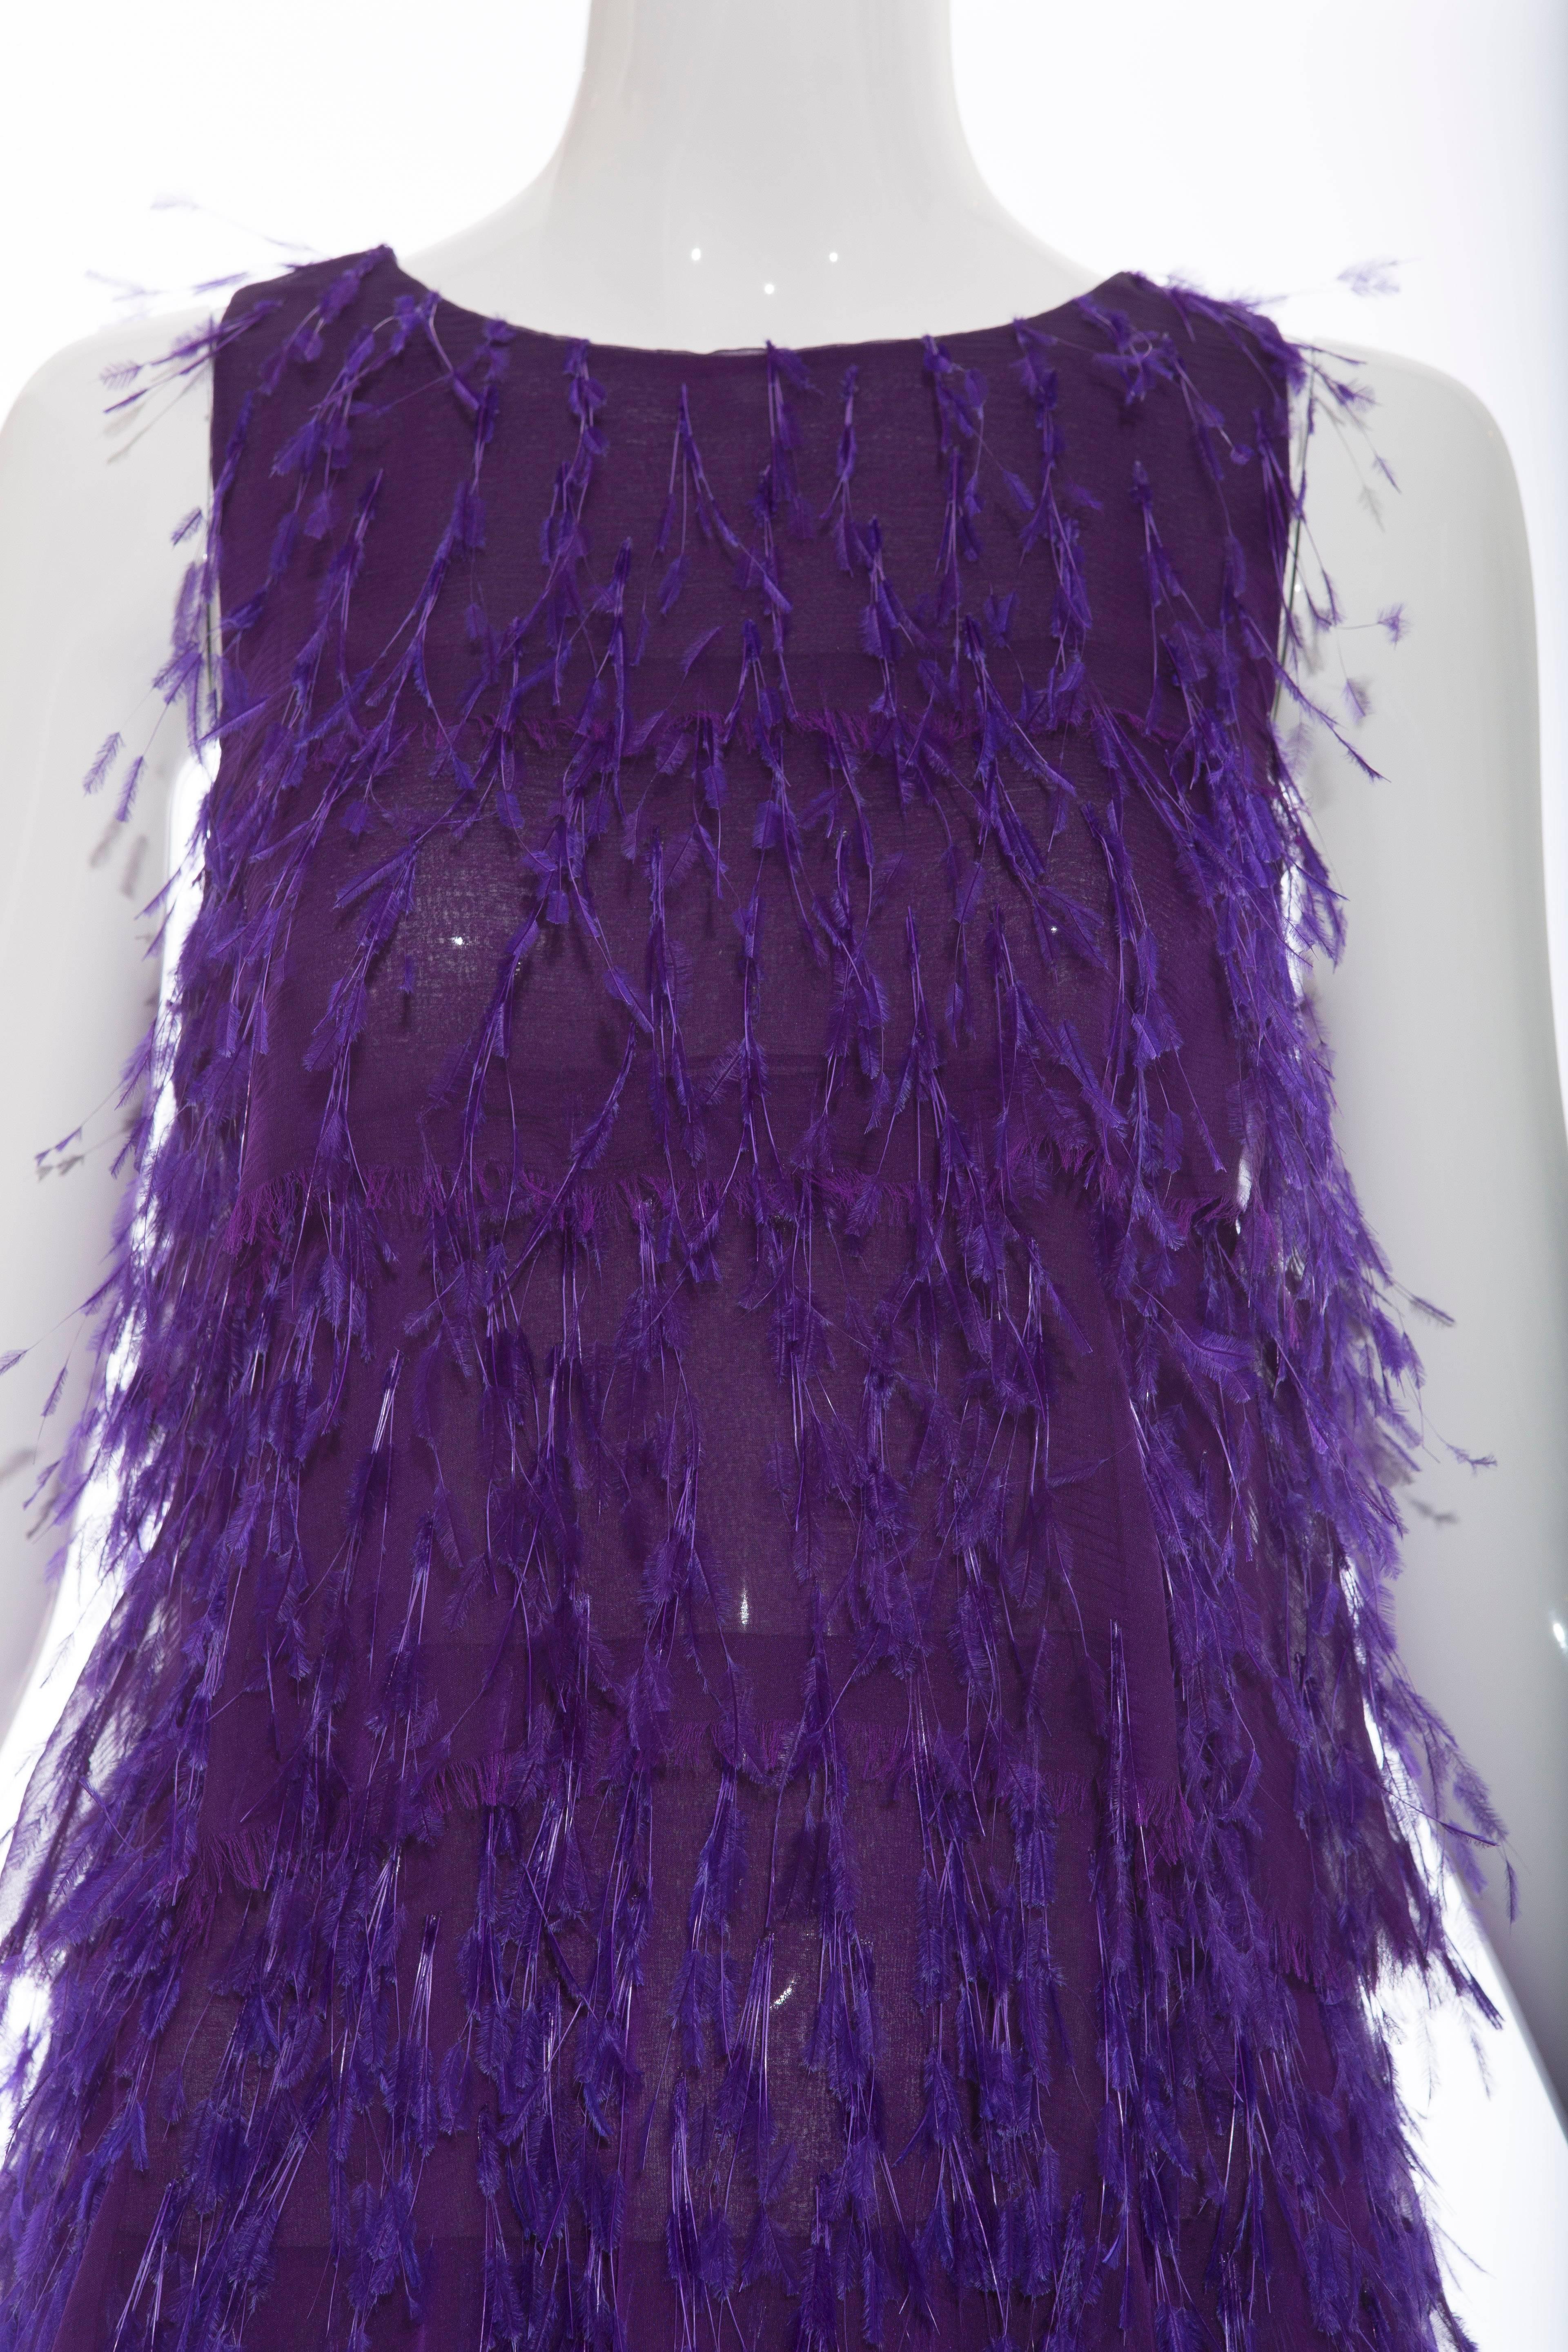 Chado Ralph Rucci Silk Dress With Feather Detail, Fall 2013 1